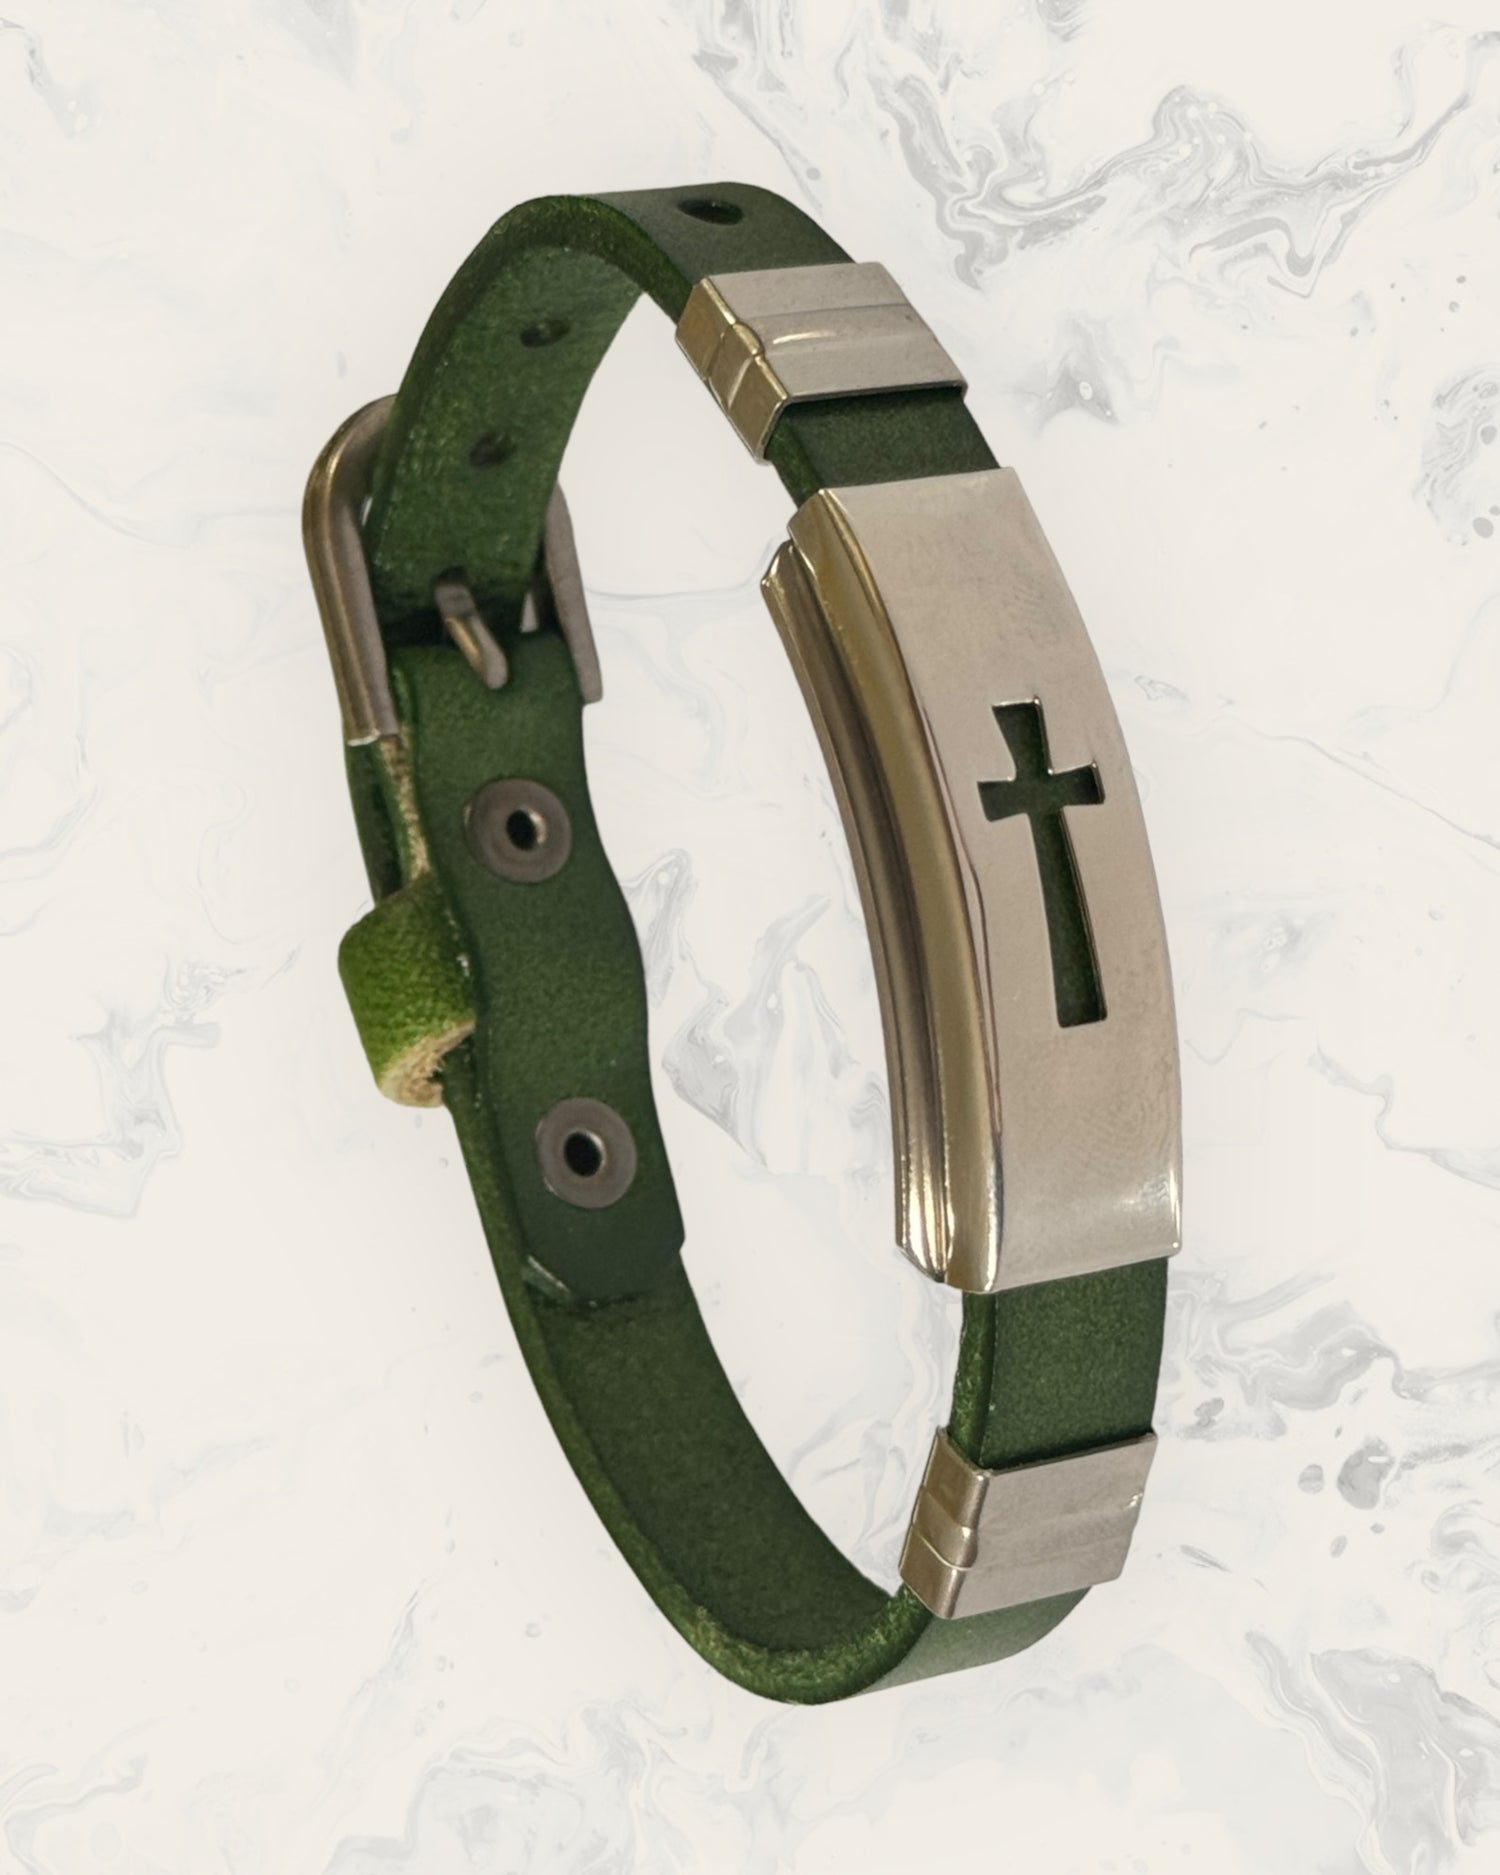 Natural Pain Relief and EMF Protection Bracelet Leather Band Color Green with Cross design on a silver metal slider